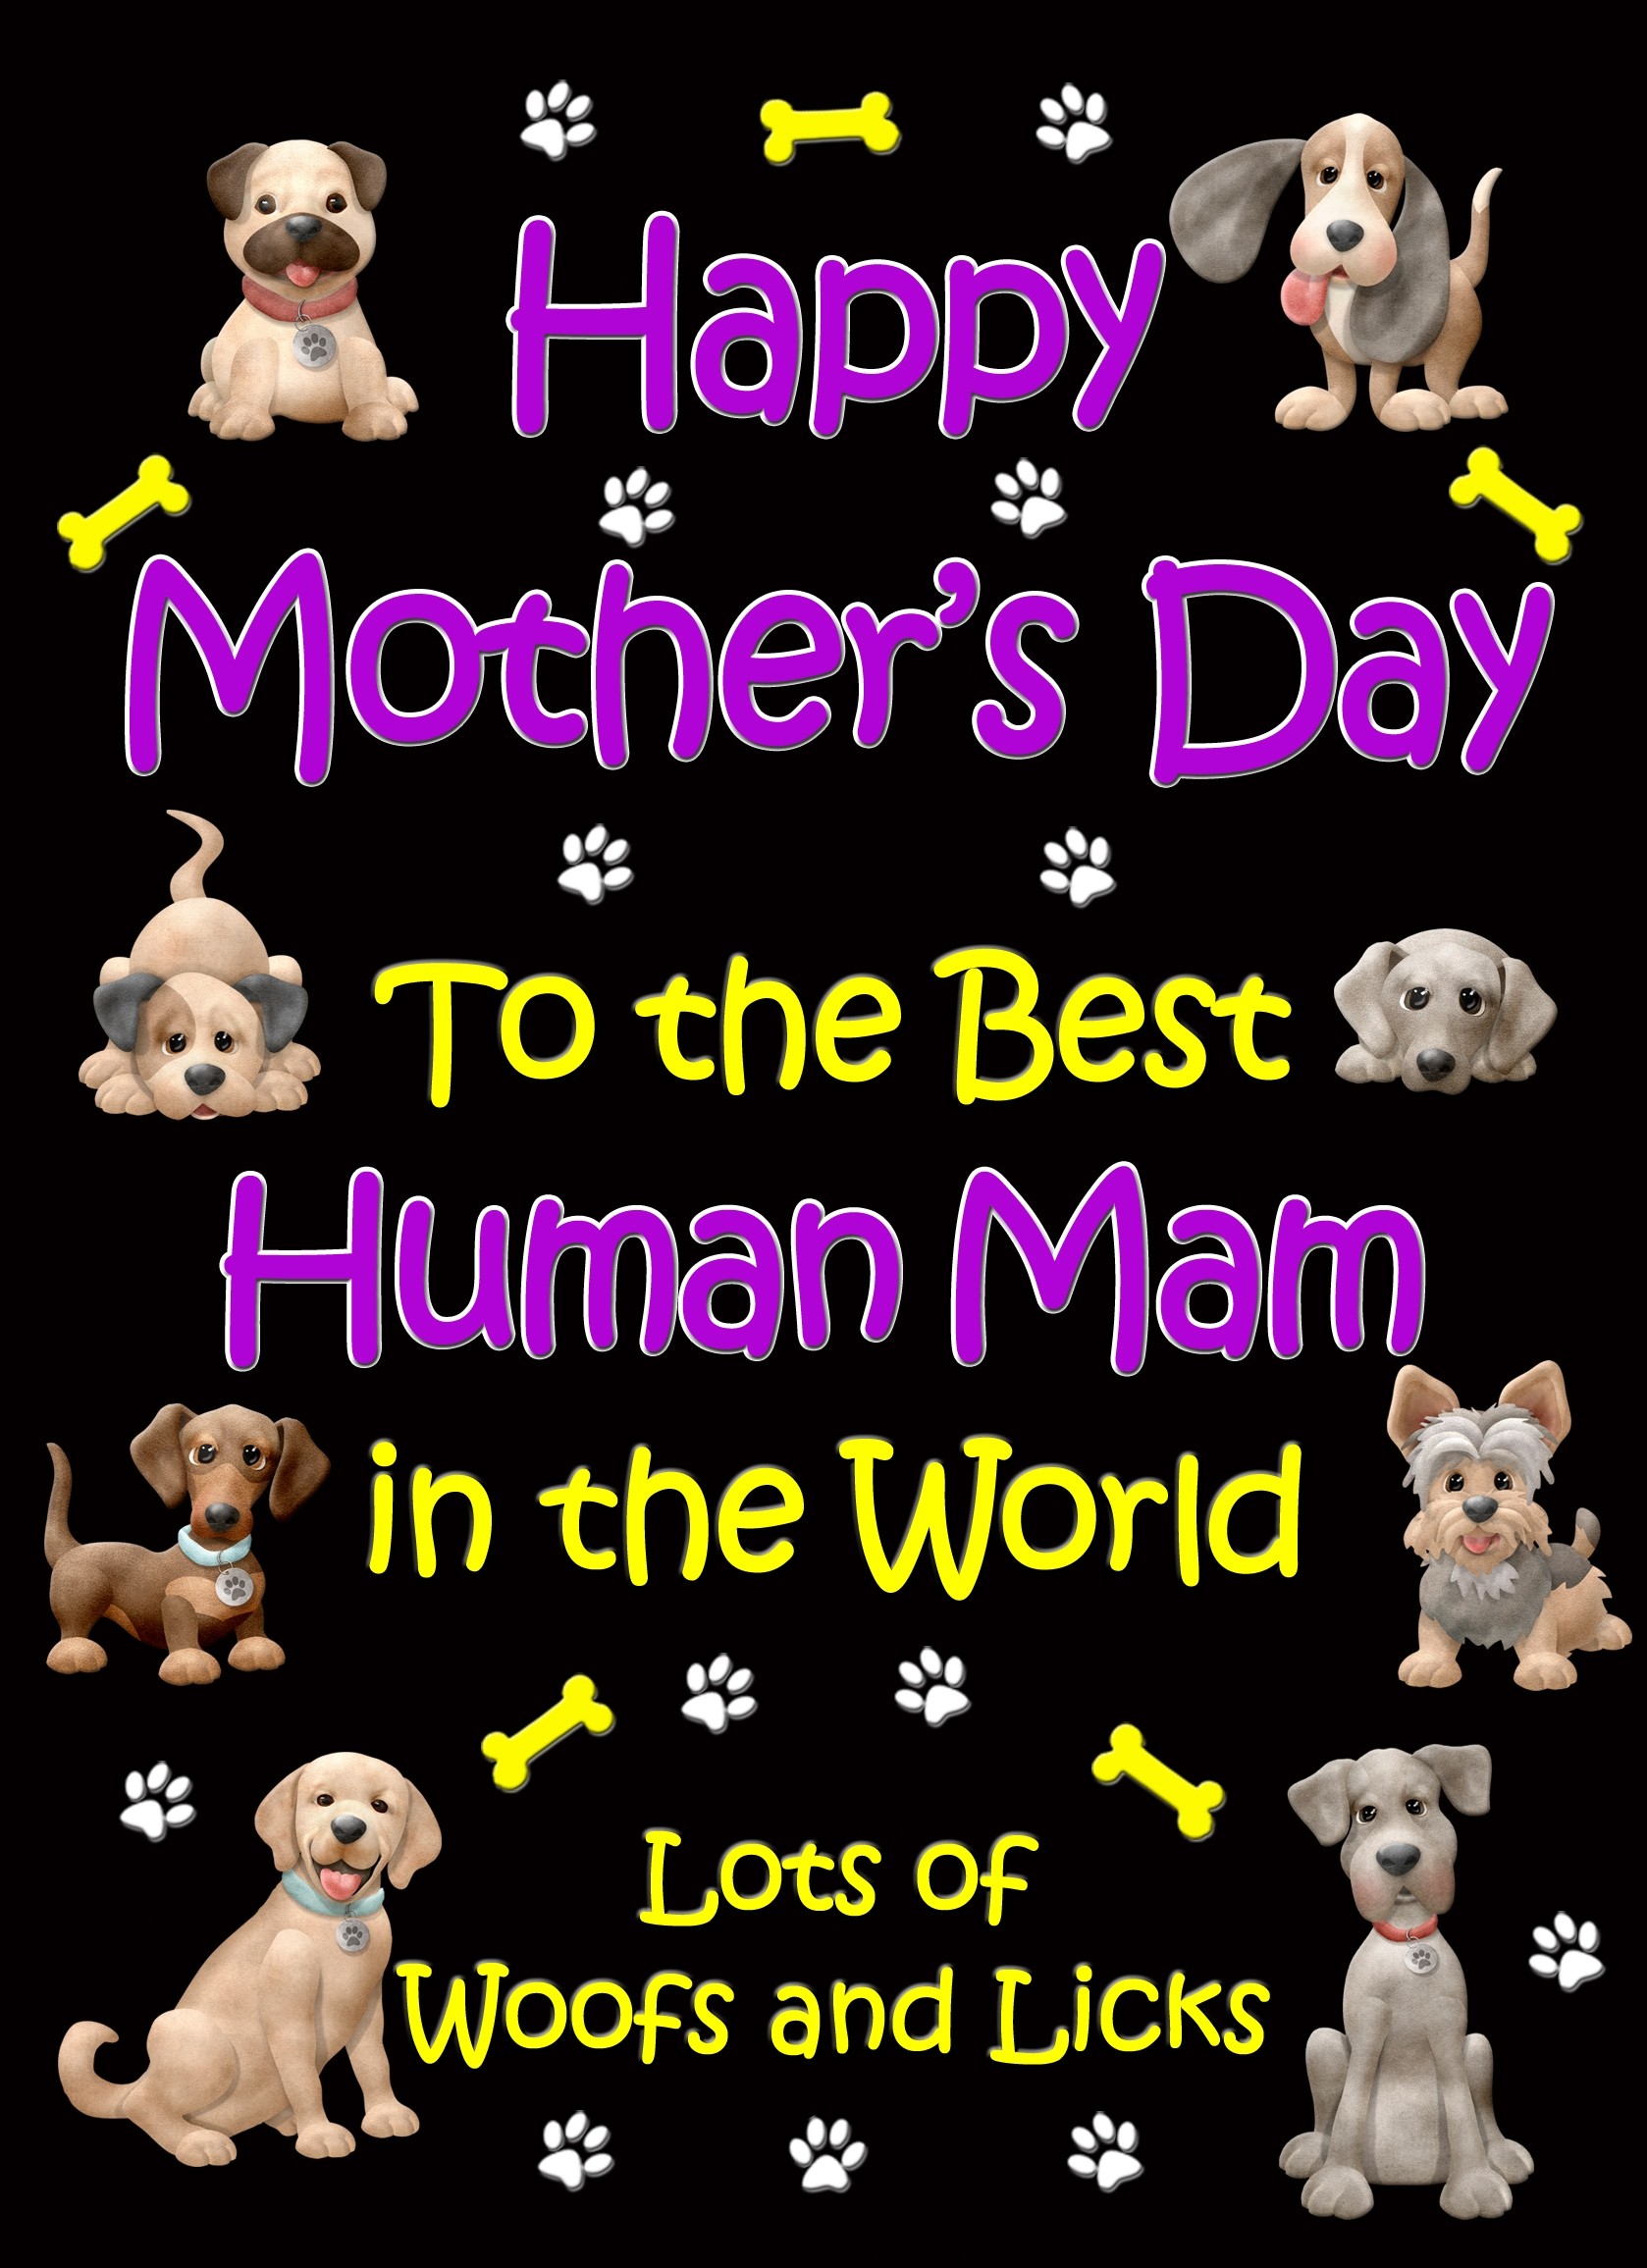 From The Dog Happy Mothers Day Card (Black, Human Mam)